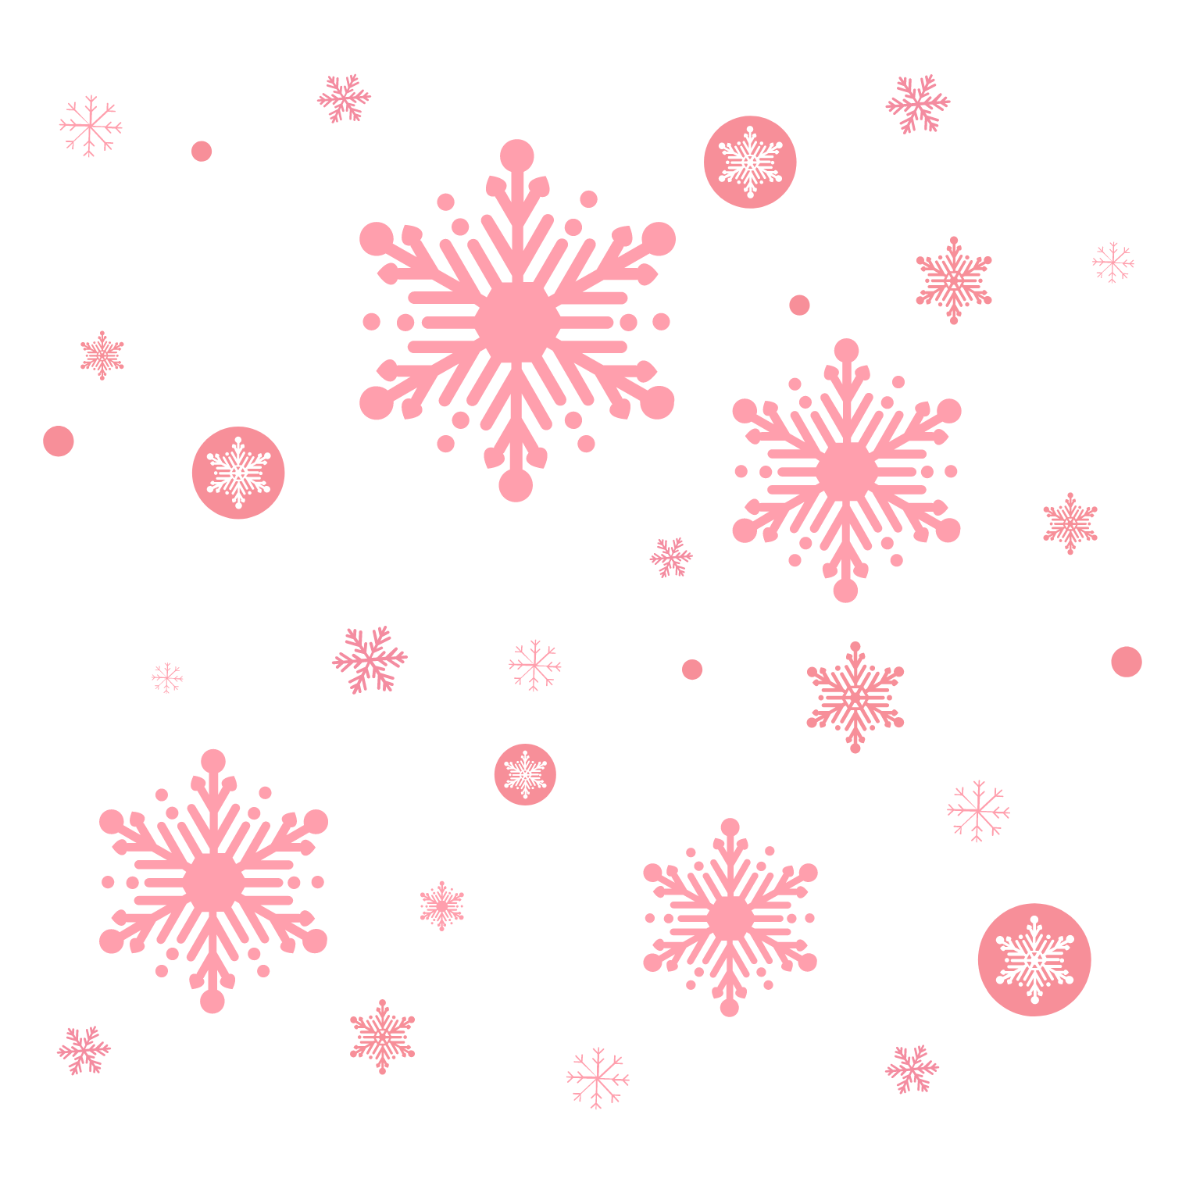 FREE Snowflake Vector Templates & Examples - Edit Online & Download ...